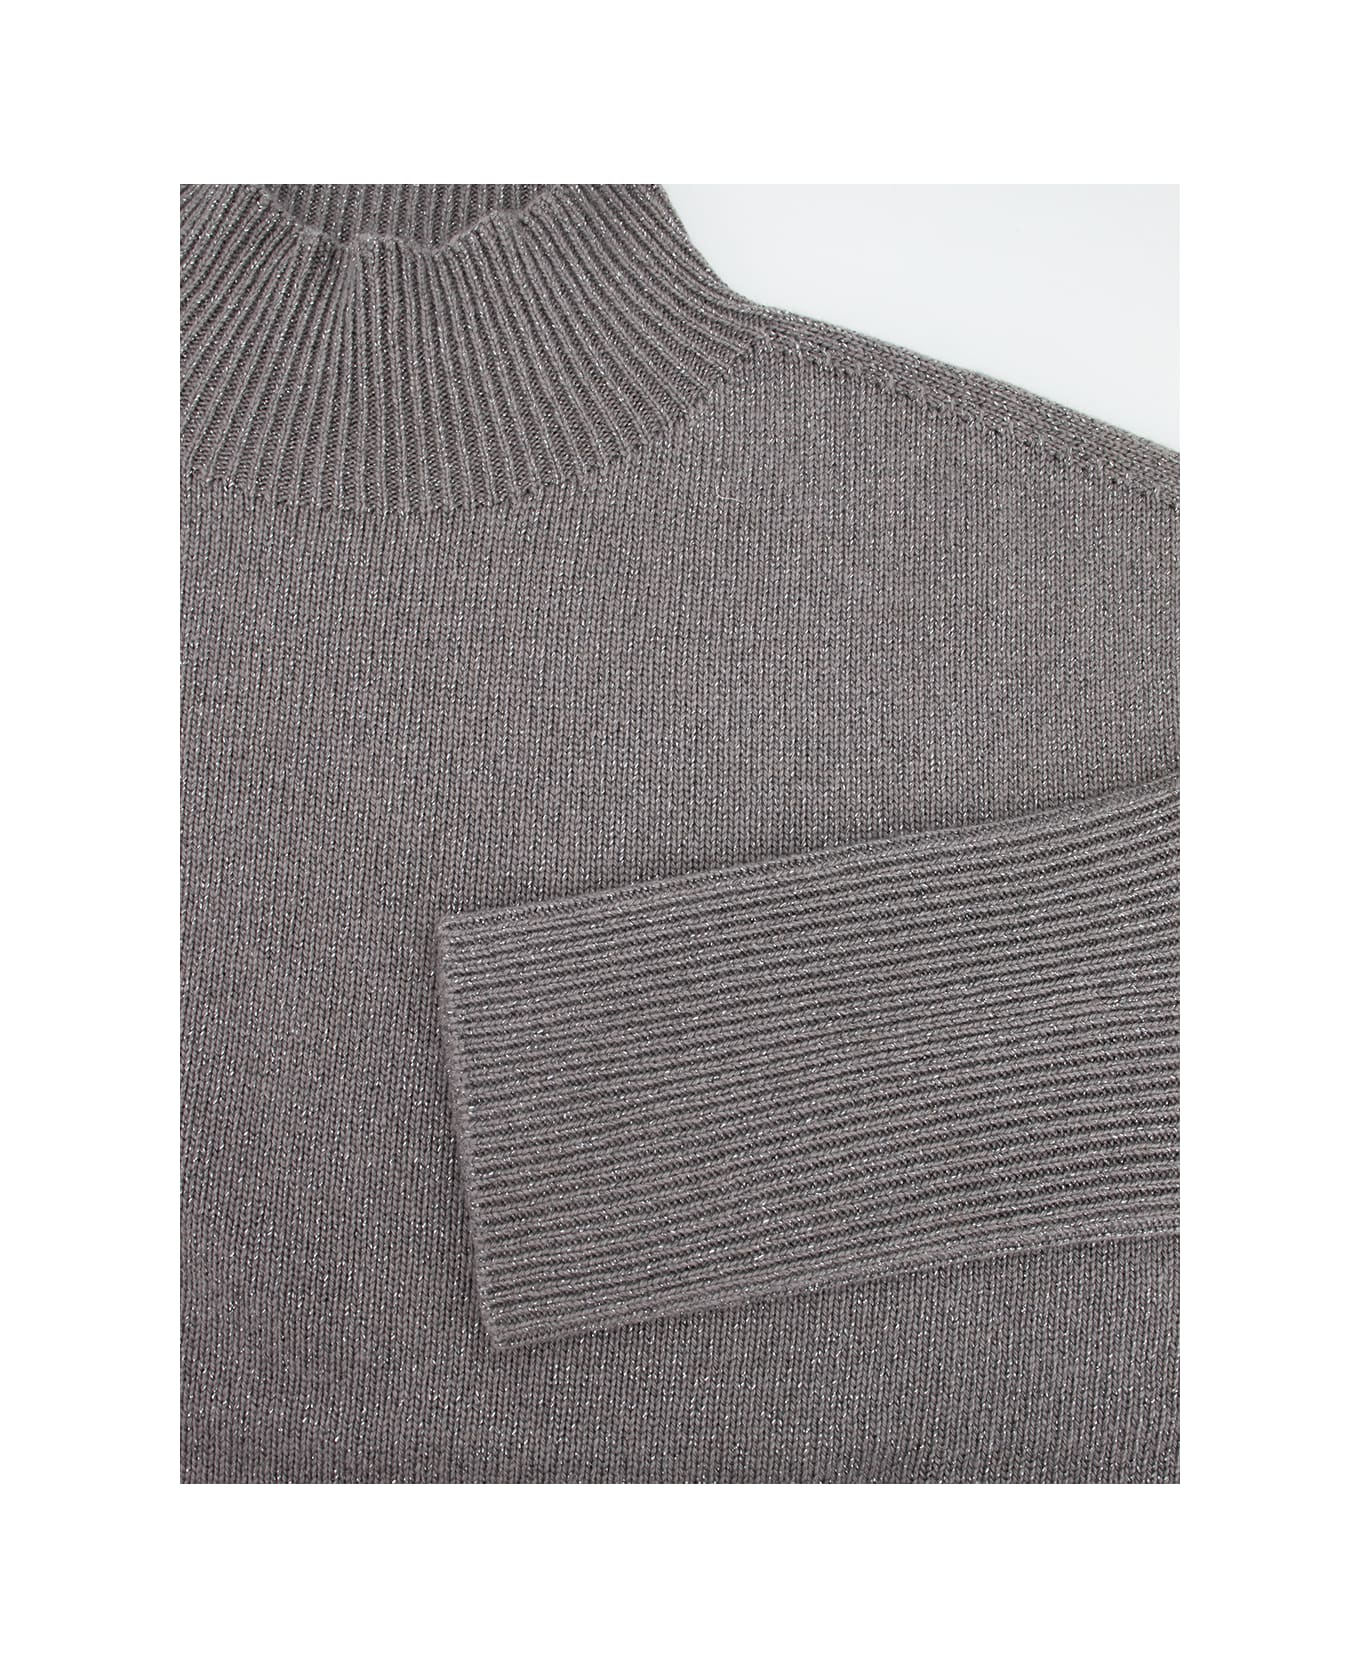 Le Tricot Perugia Sweater - TAUPE/GREY LX